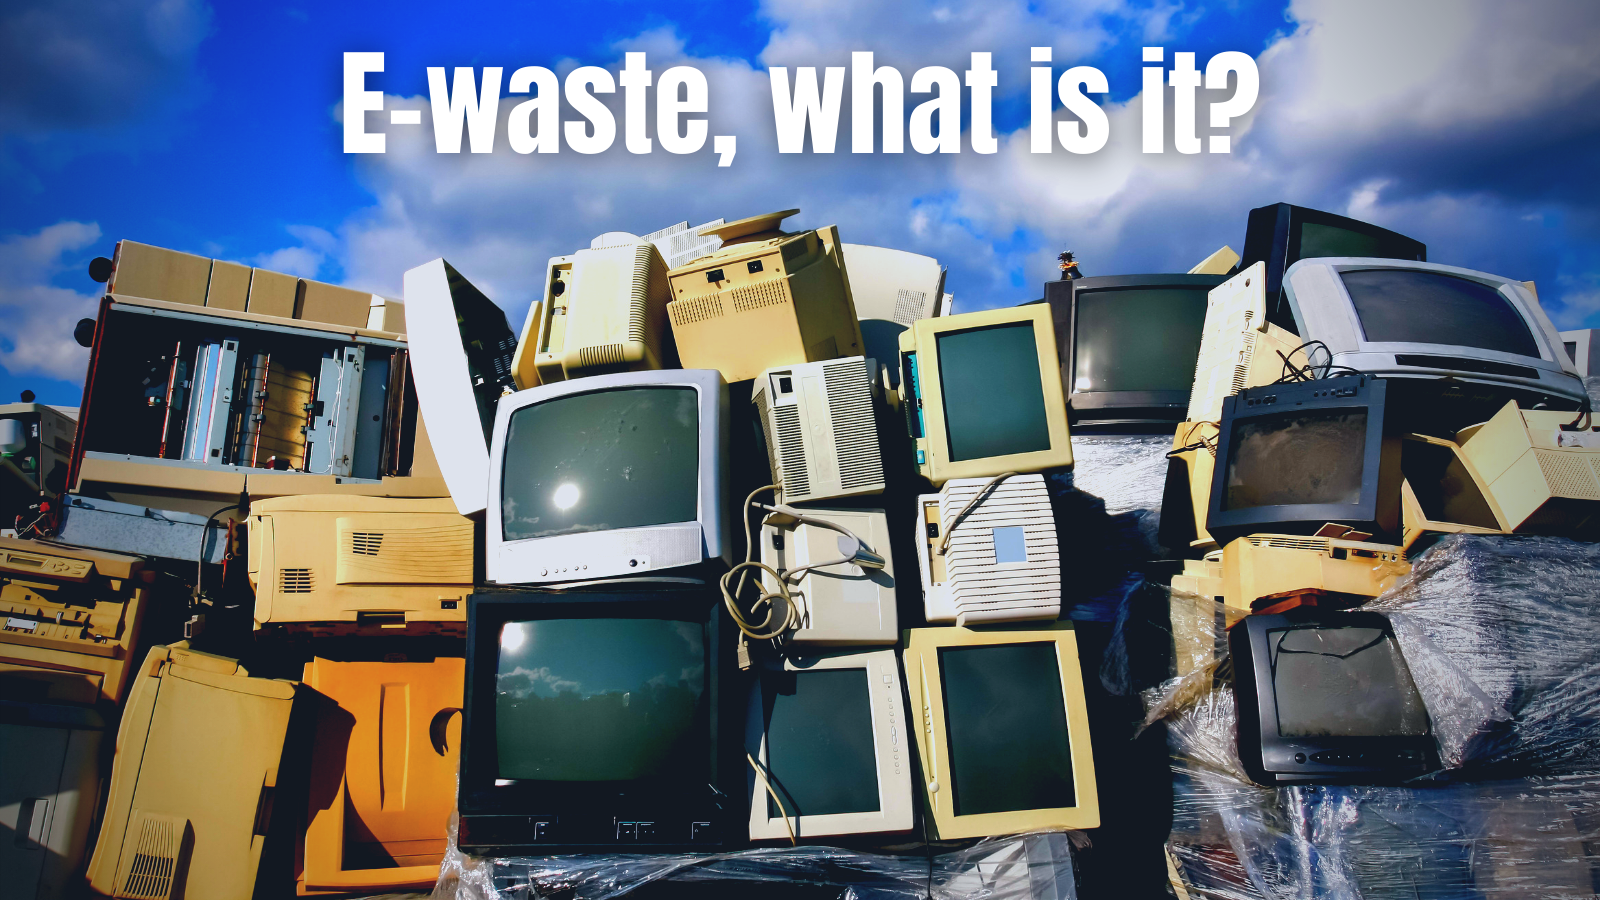 Electronic Waste: What Is It And How Do We Dispose Of It?